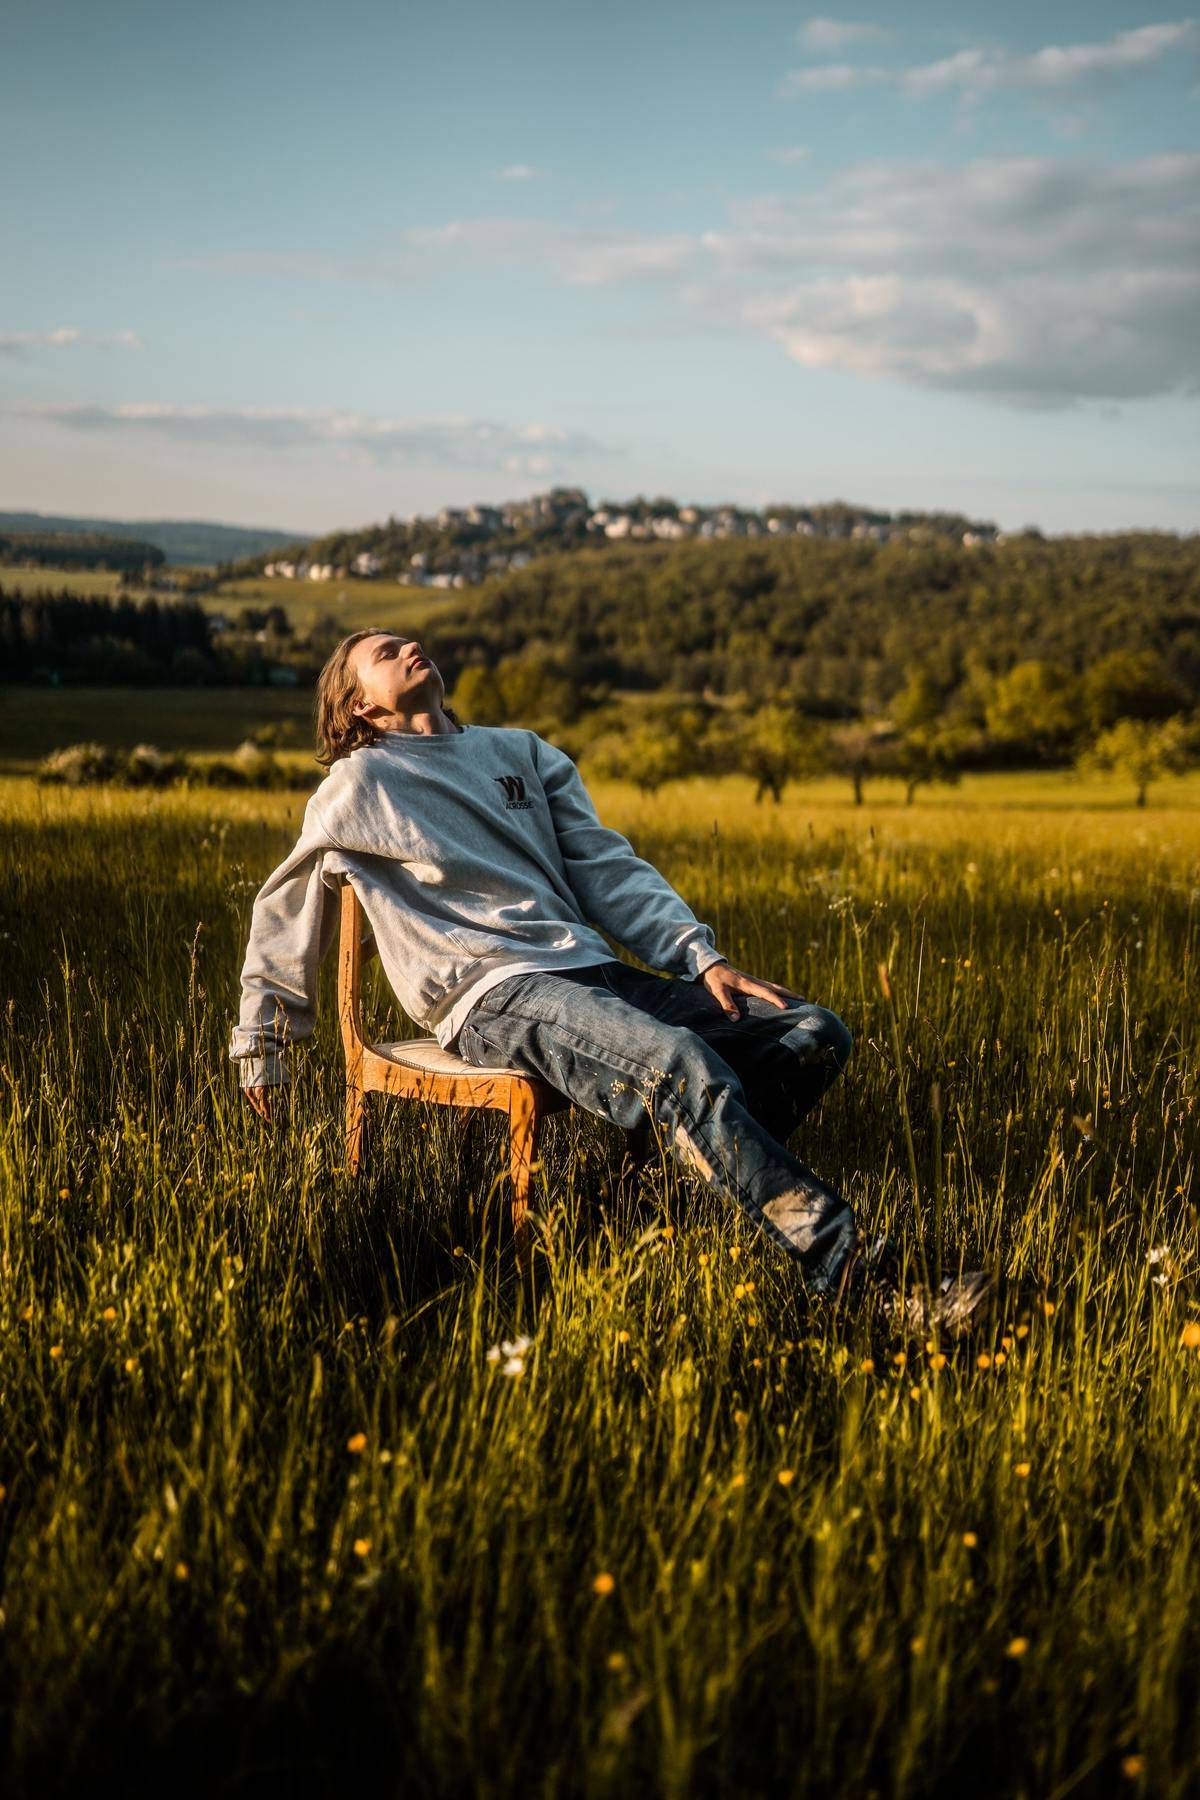 A man sitting in a chair in the middle of a field, the sun shining down on him.